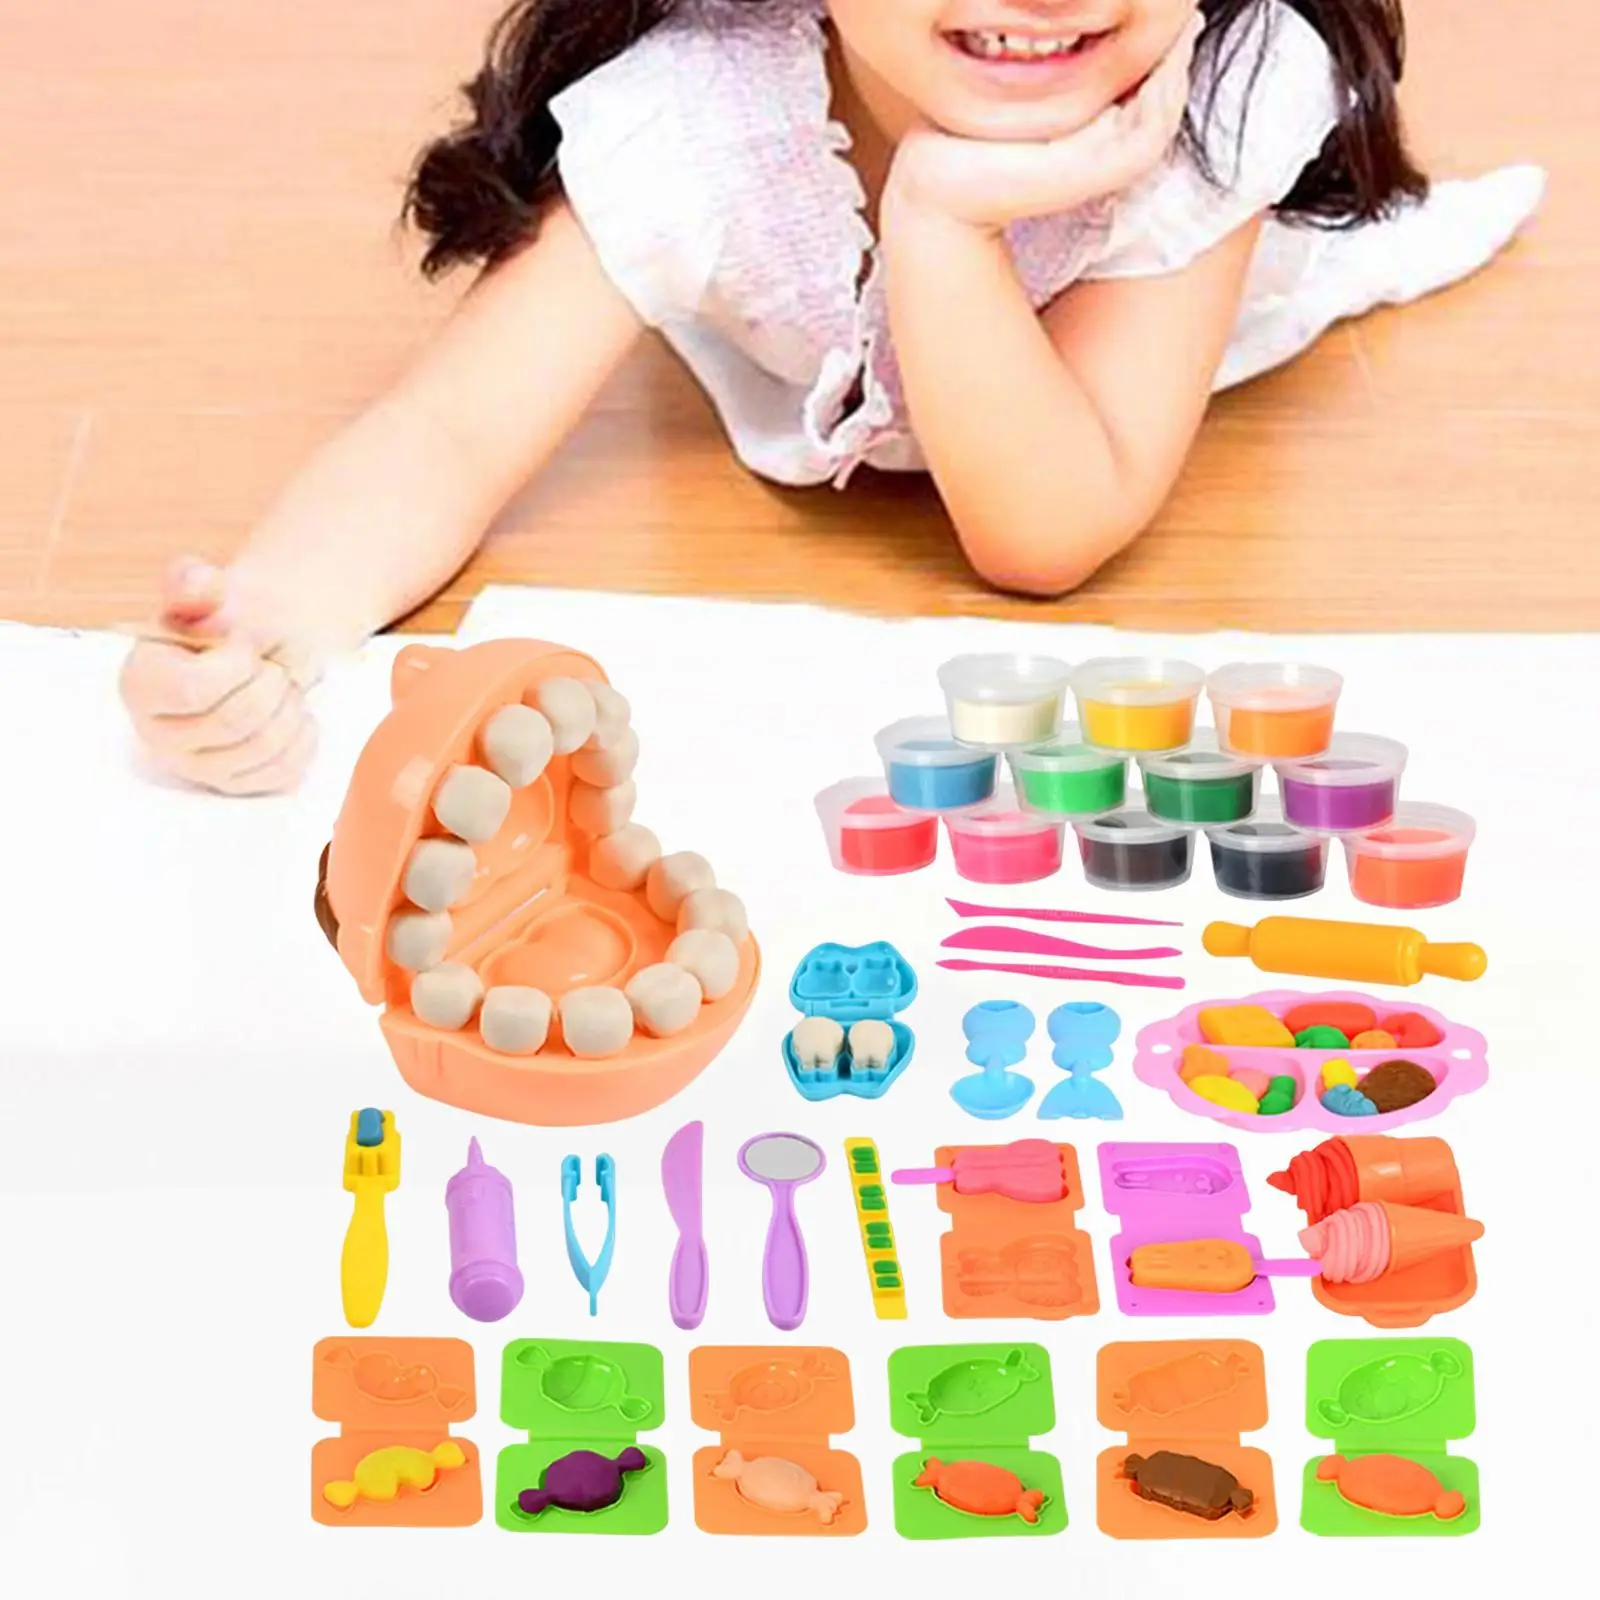 Modeling Clay Set Art Crafts Color Play Set Pretend Play with Accessoires for Children Boys Gift